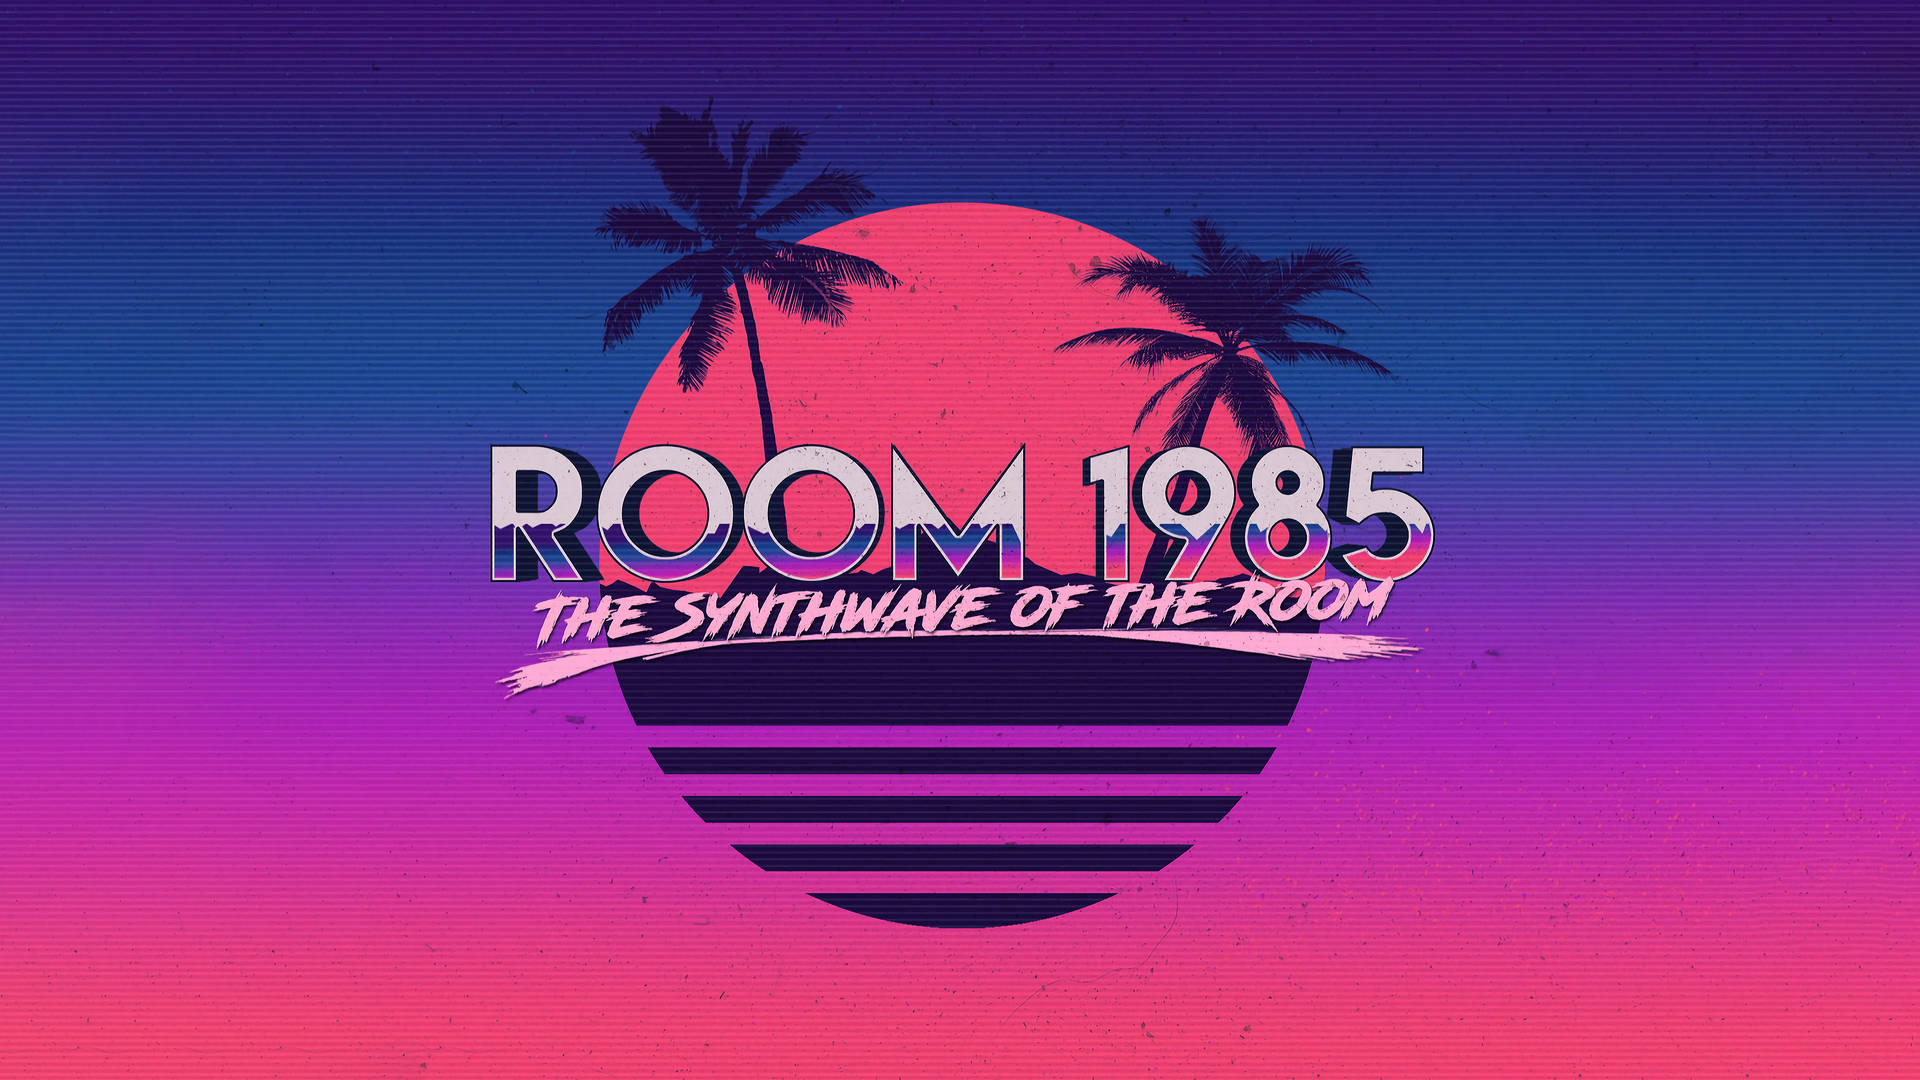 Synthwave The Room 1985 Wallpaper